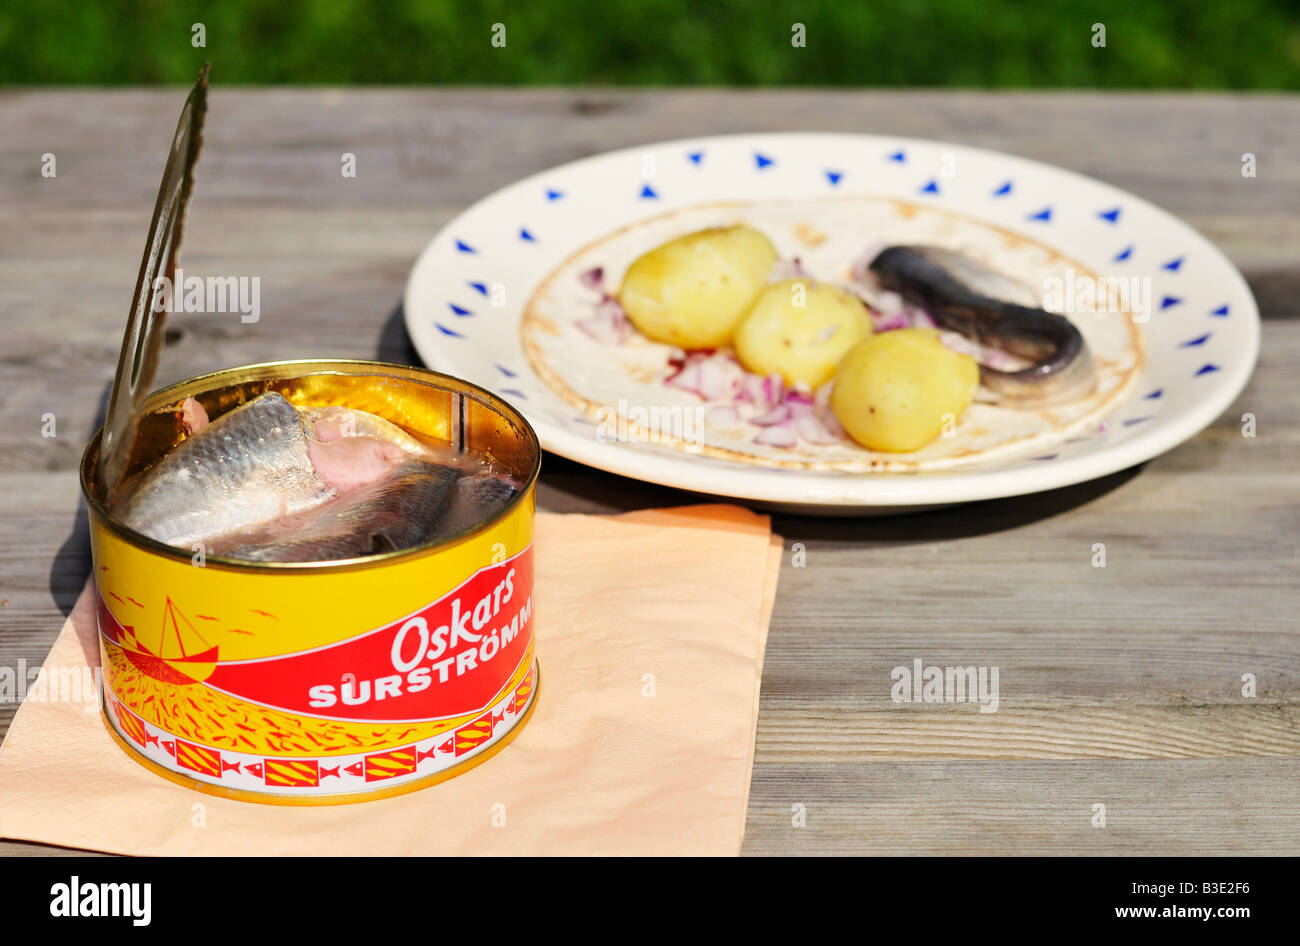 Surstromming Fermented baltic herring in a opened can a Swedish delicacy Stockholms Lan Sweden August 2008 Stock Photo